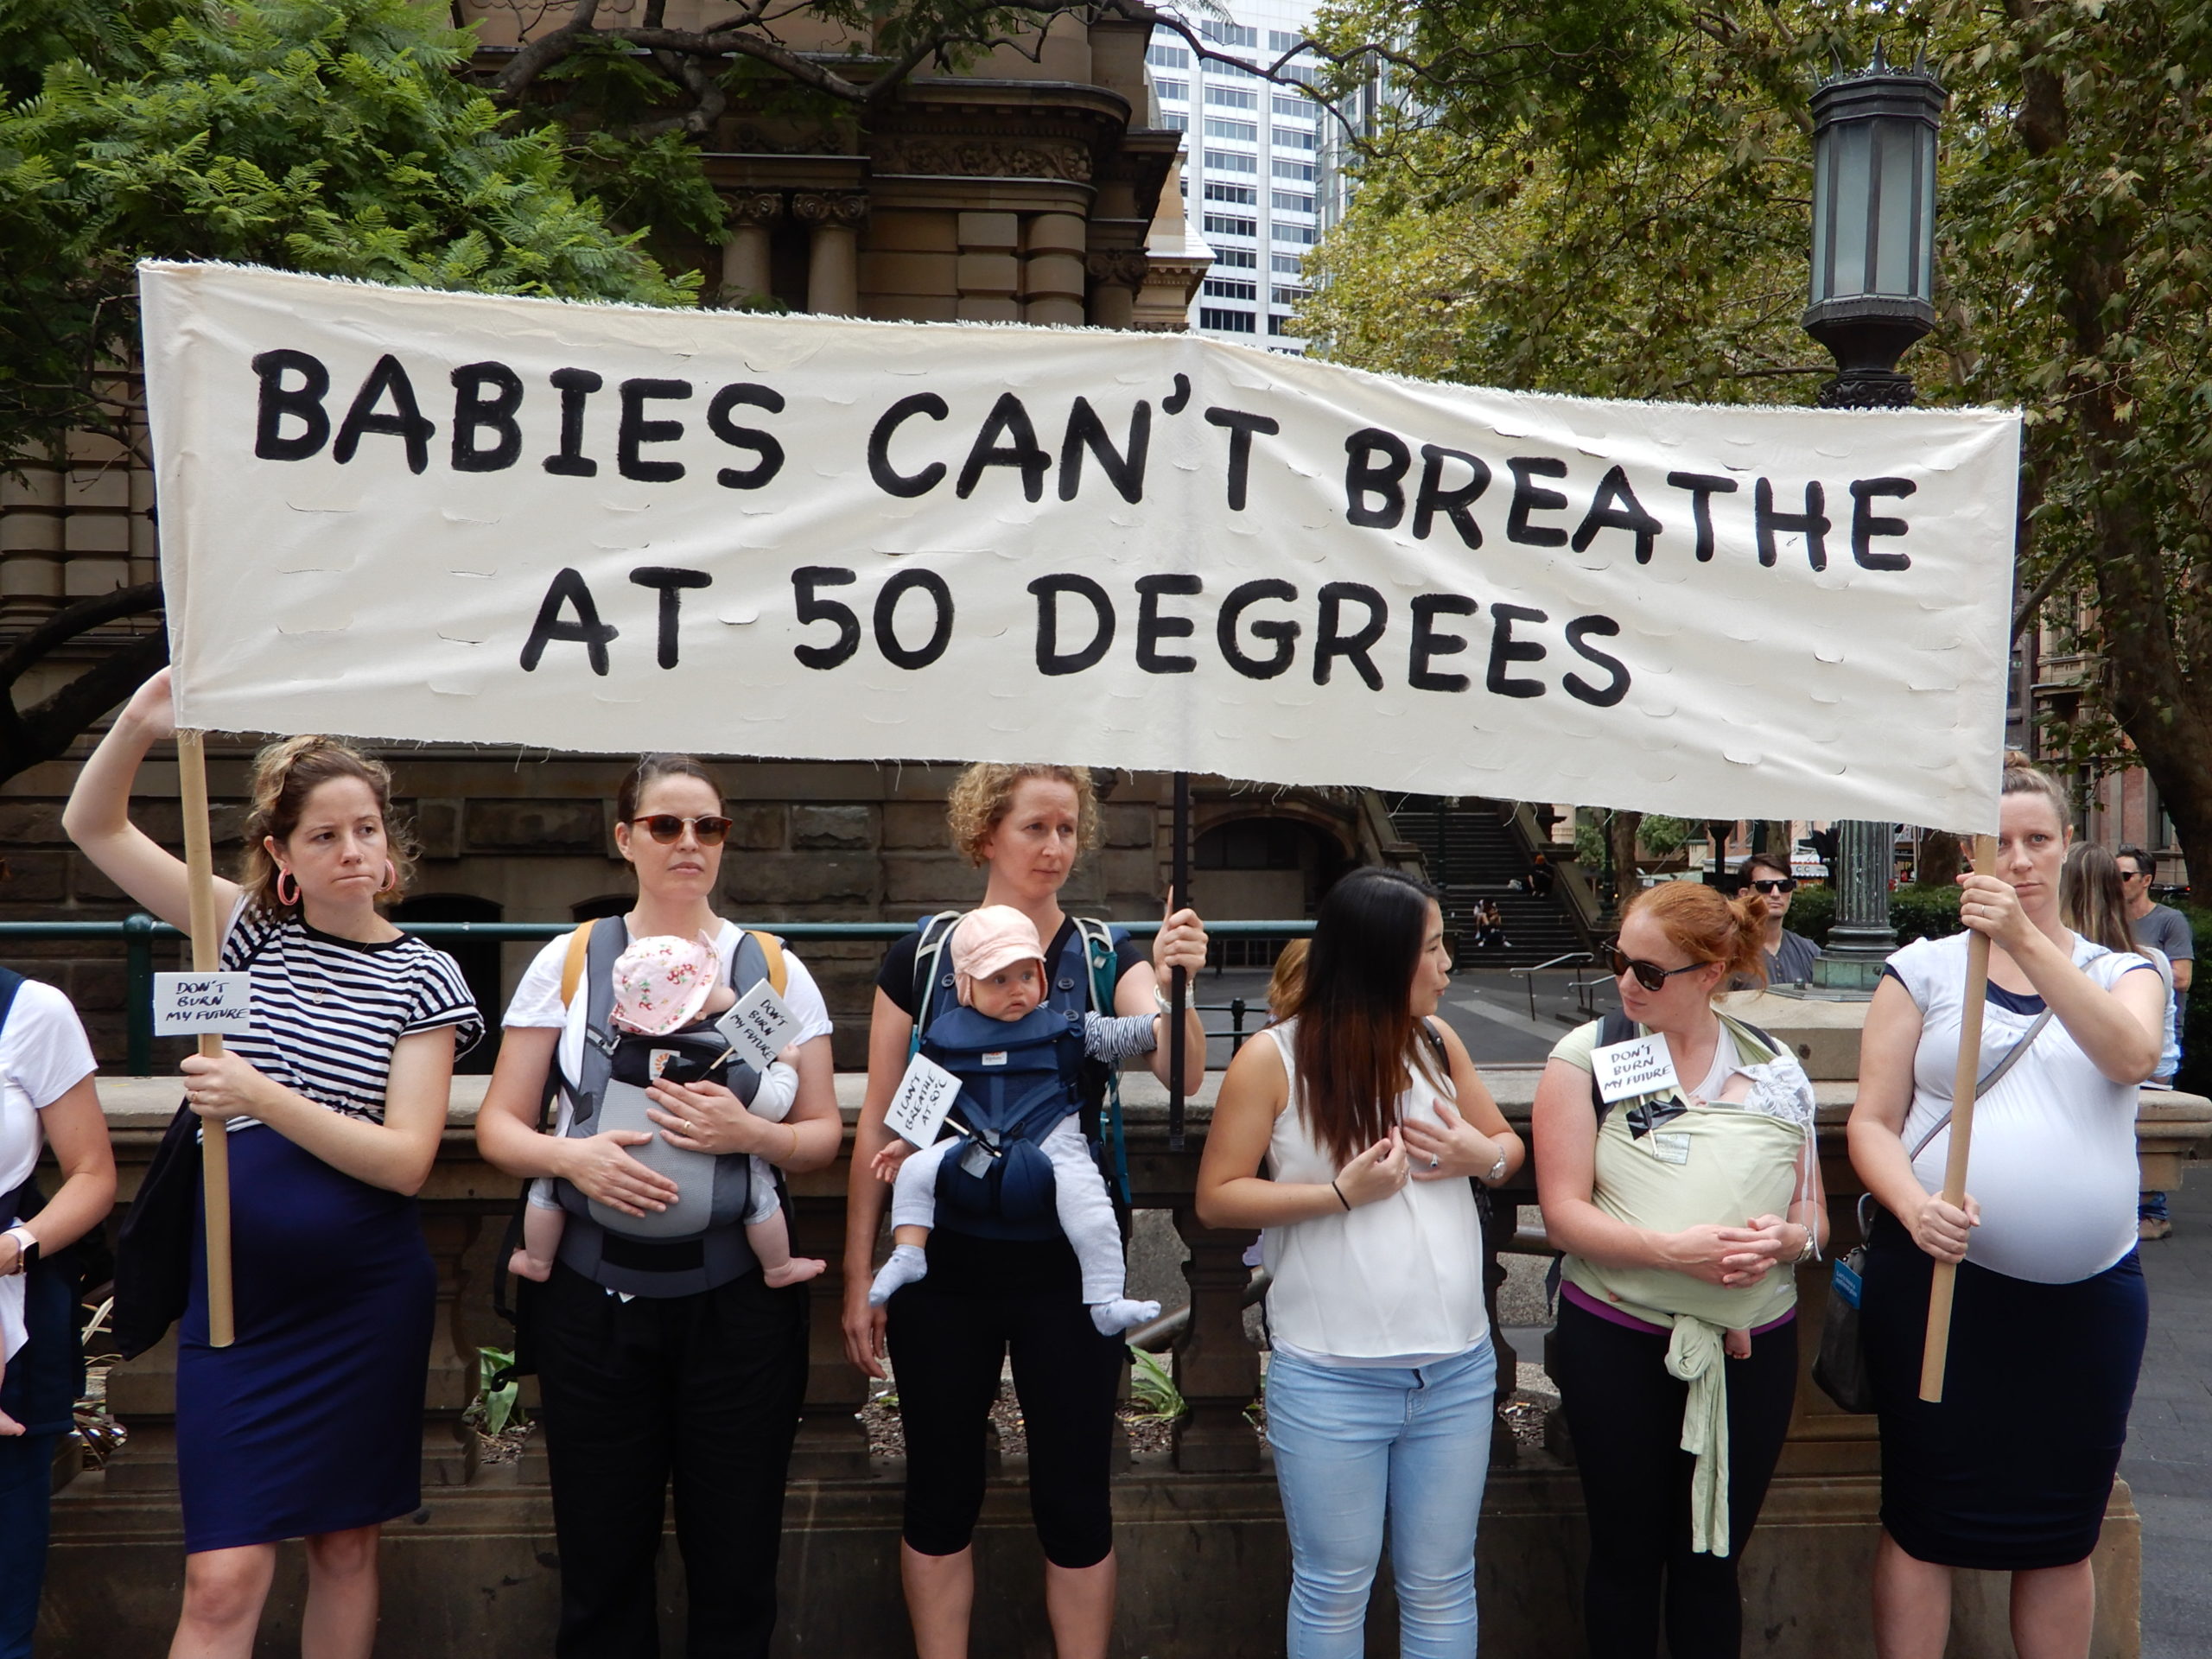 Babies can't breathe at 50 degrees